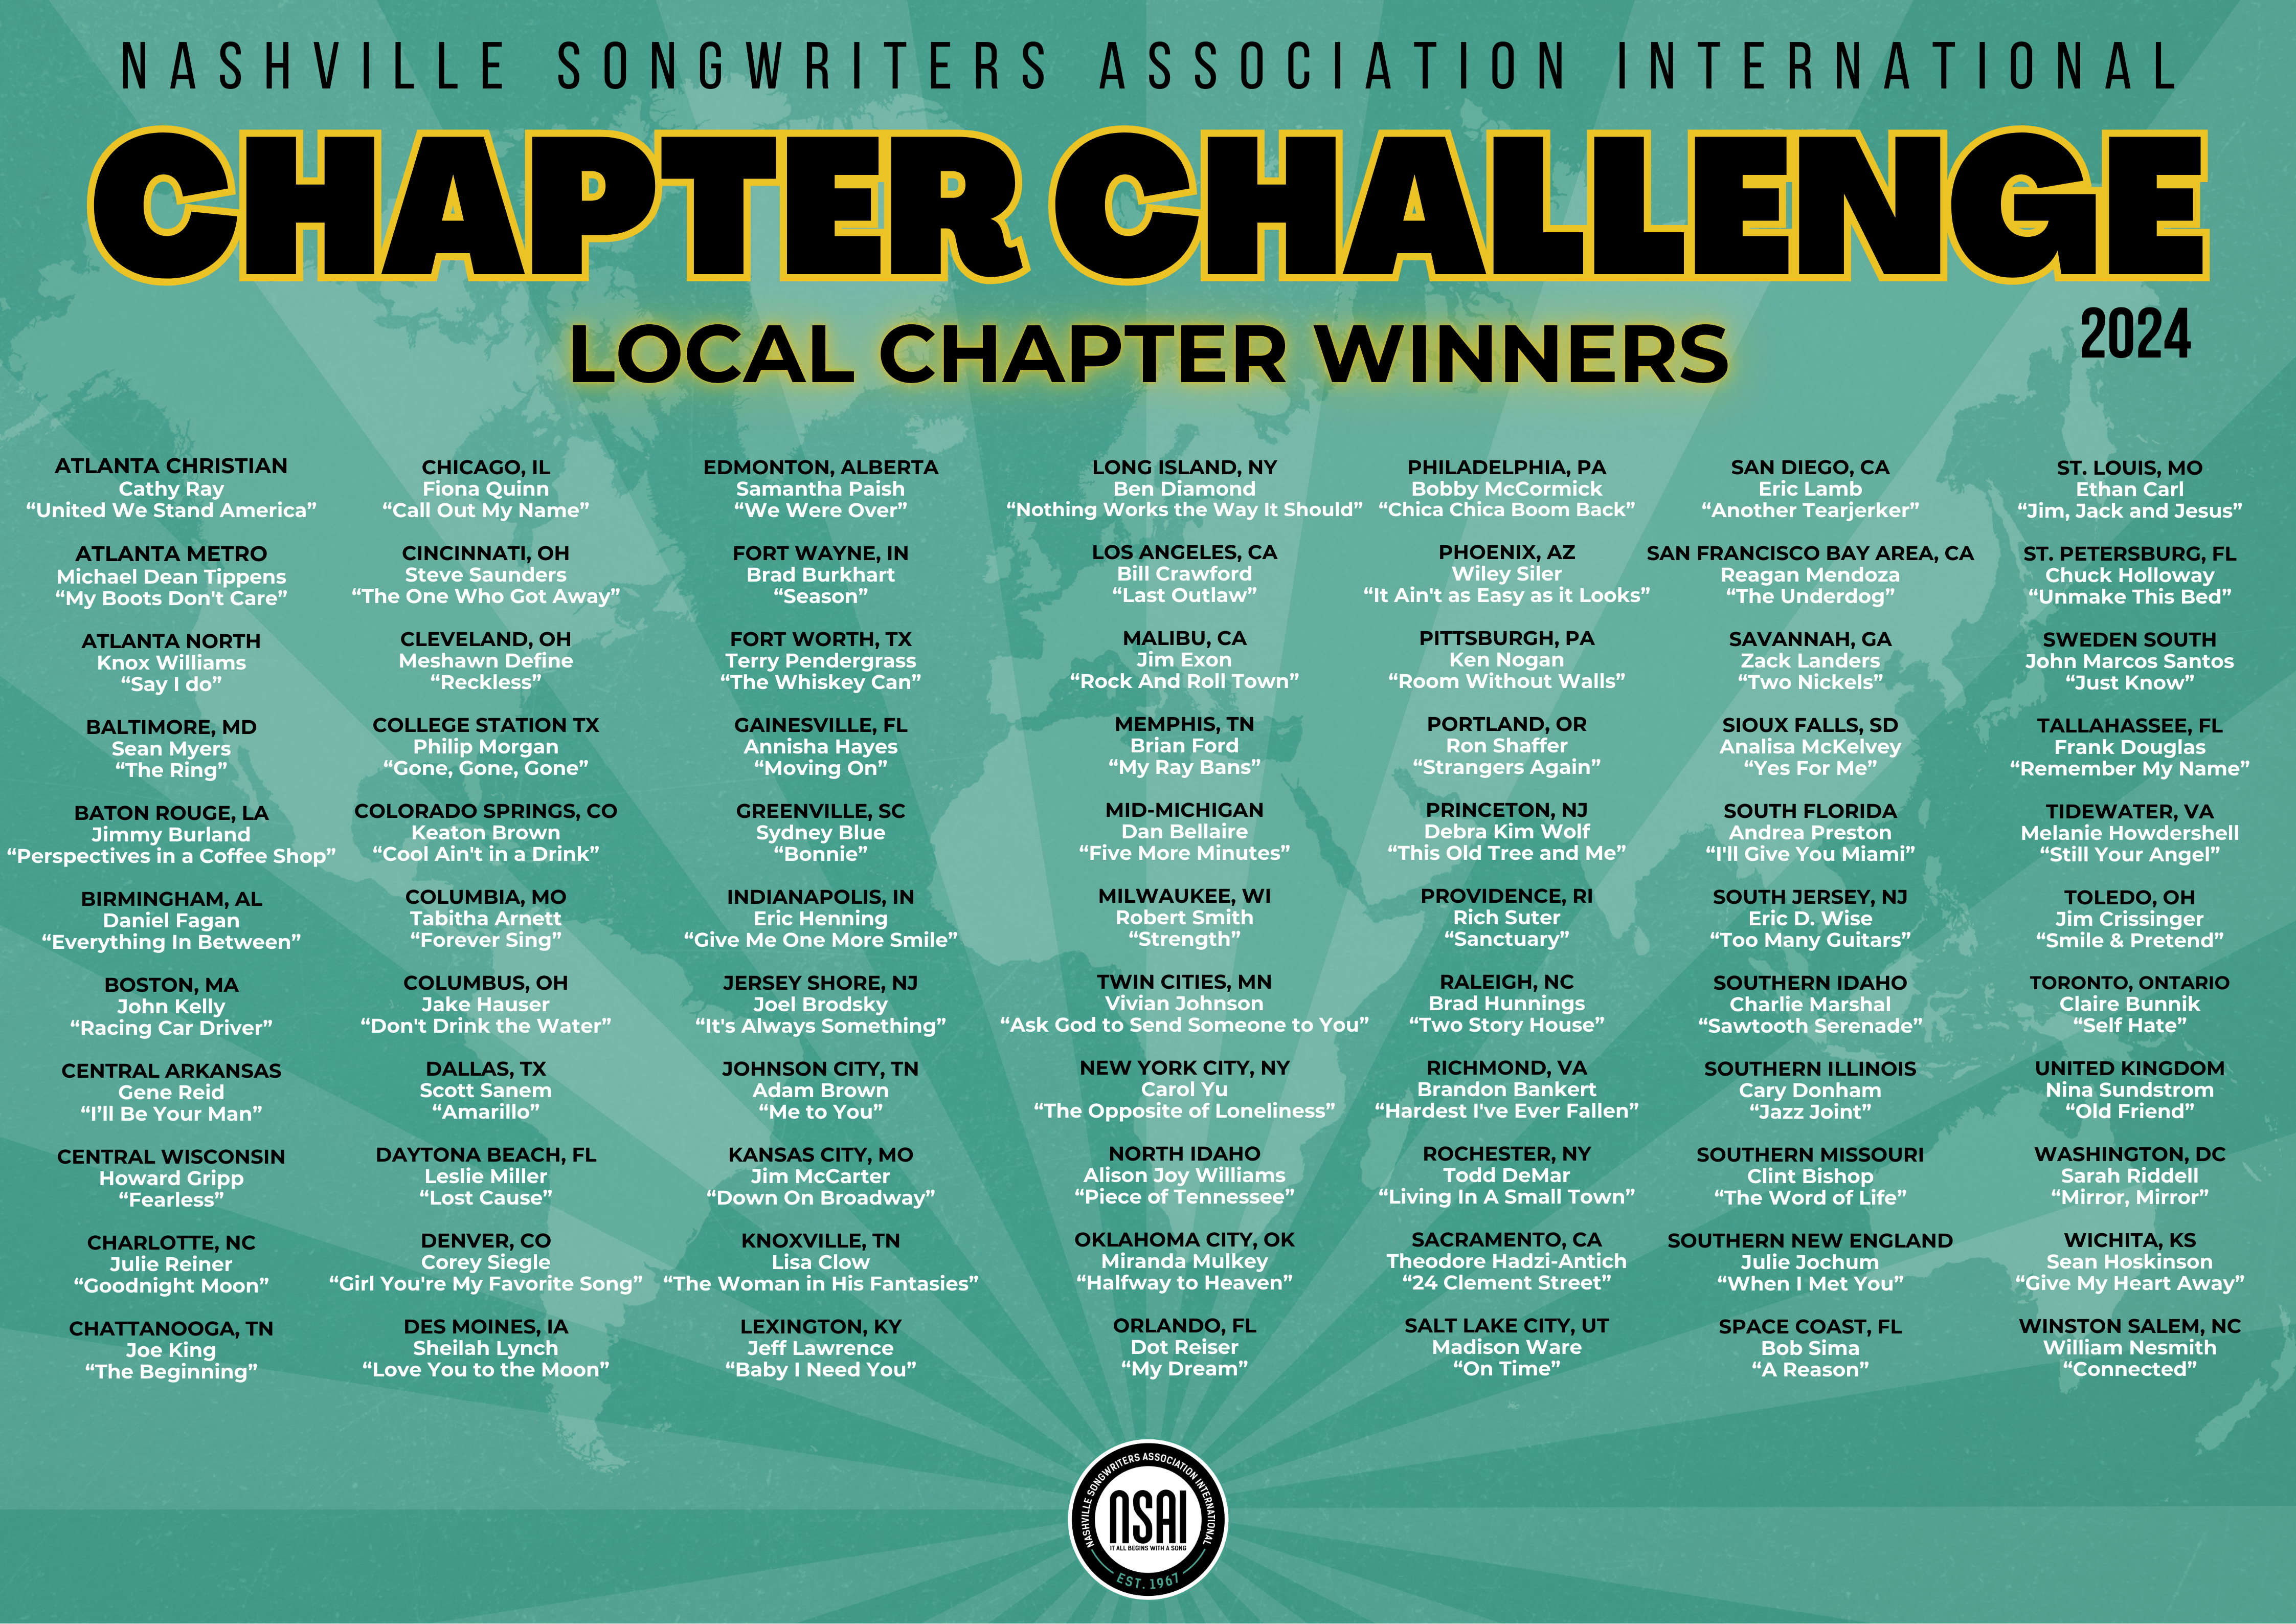 All Local Chapter Winners